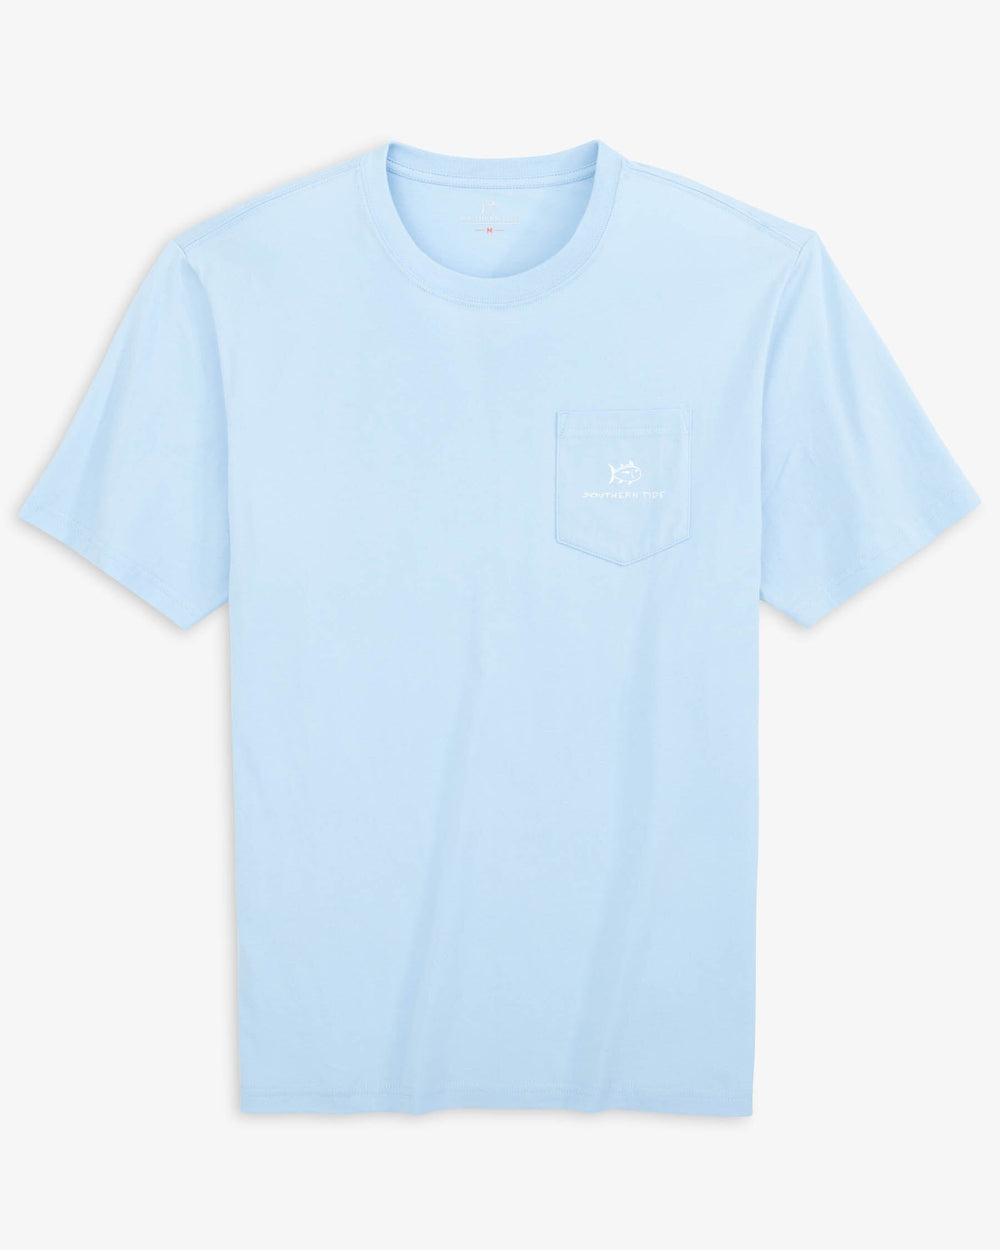 The front view of the Southern Tide Day at the Beach T-shirt by Southern Tide - Clearwater Blue